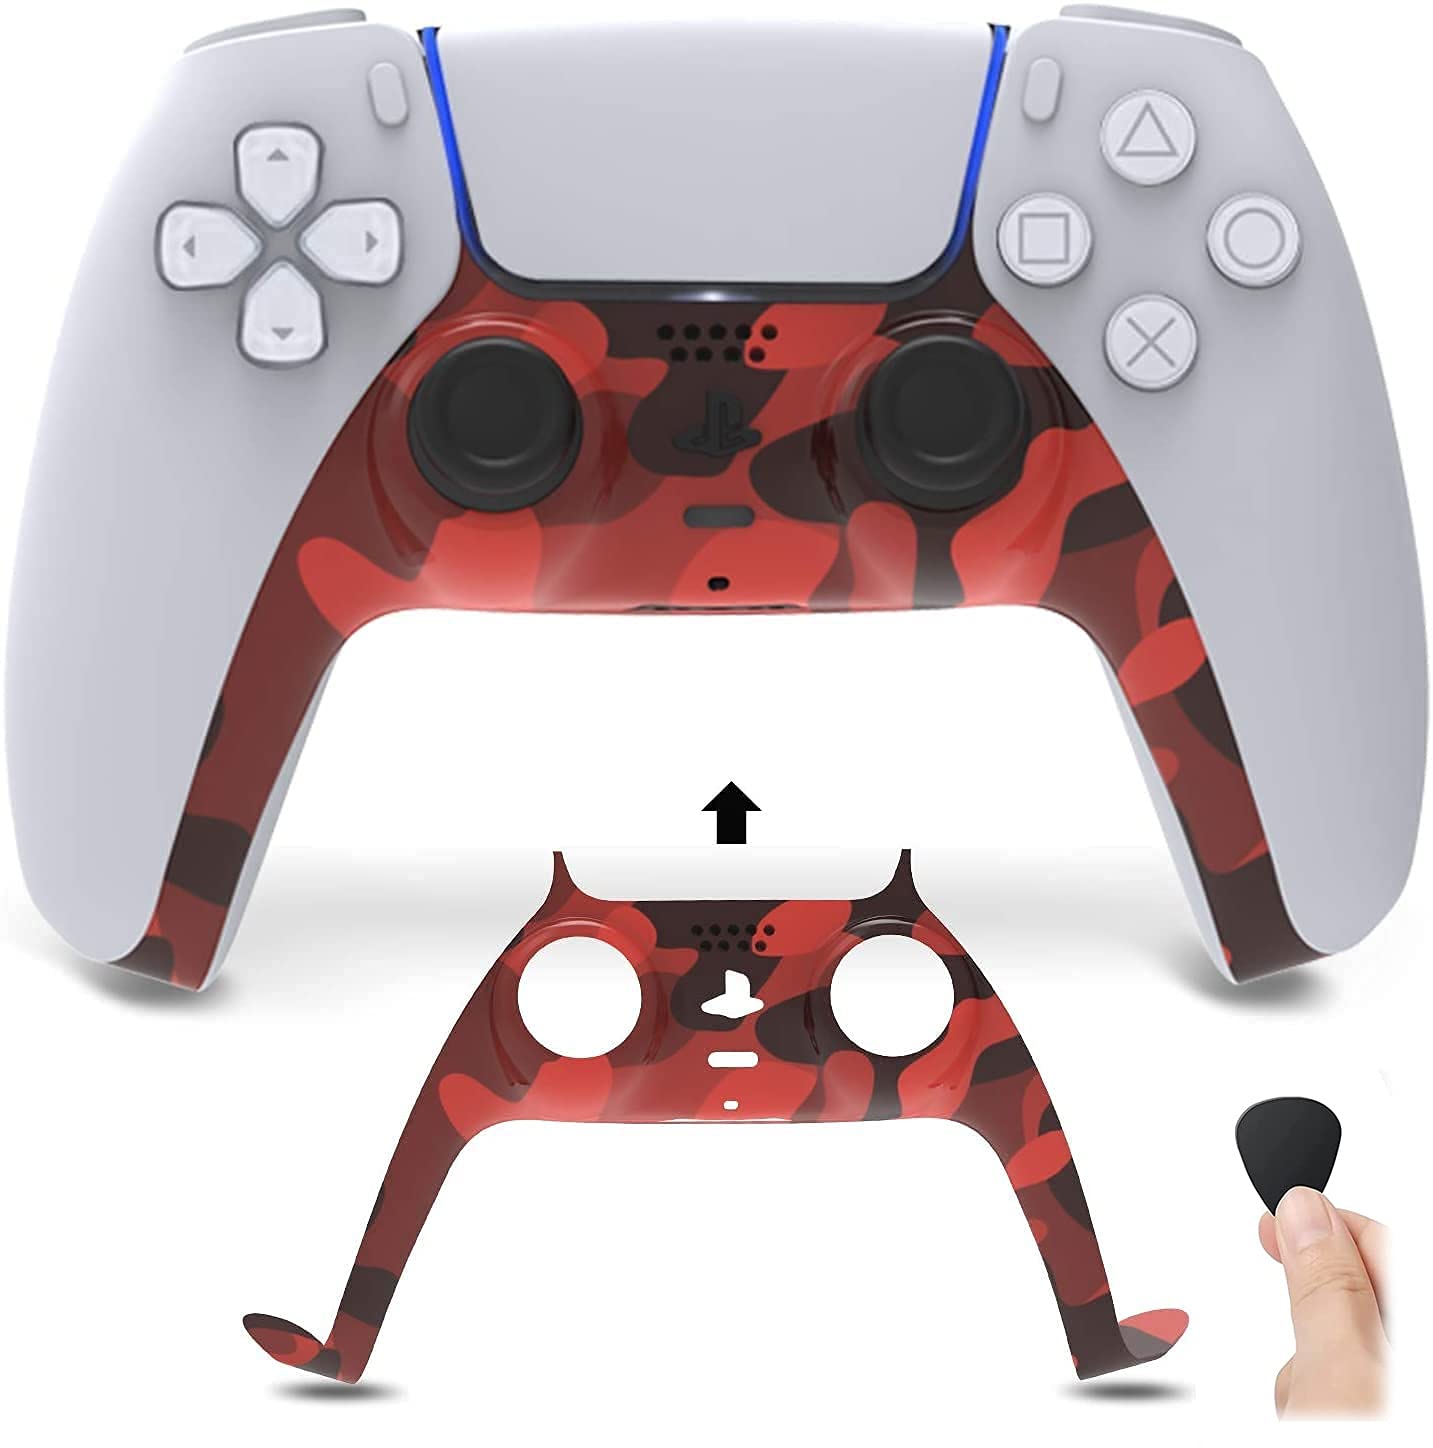 Faceplate For PS5 Controller , For PS5 Controller Plate Cover Replacement Shell Decoration Accessories, for PS5 Playstation 5 DualSense Controller- Red Camouflage with Faceplate removal Tool